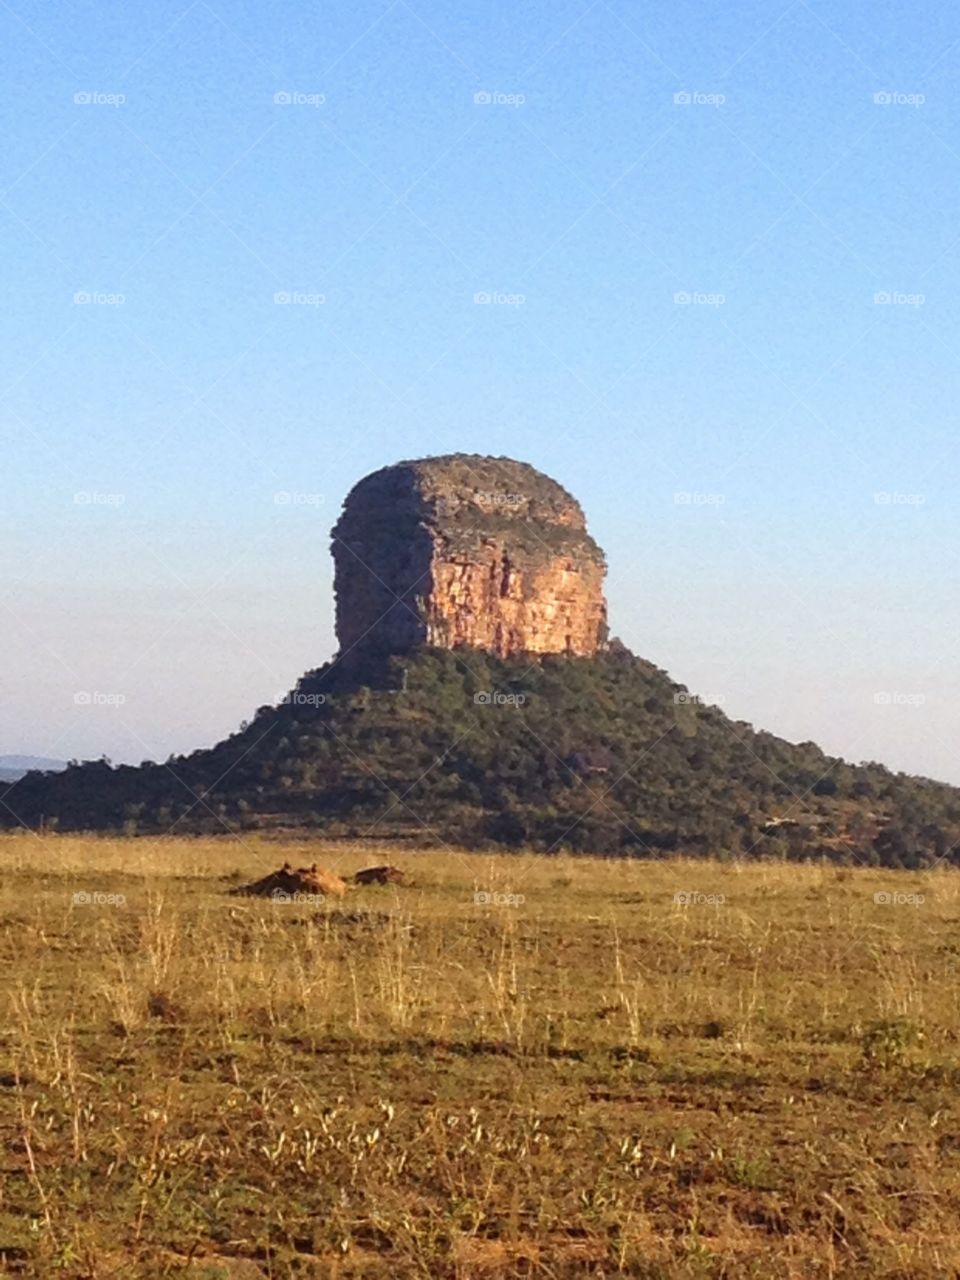 Square Mountain. A square mountain in South-Africa